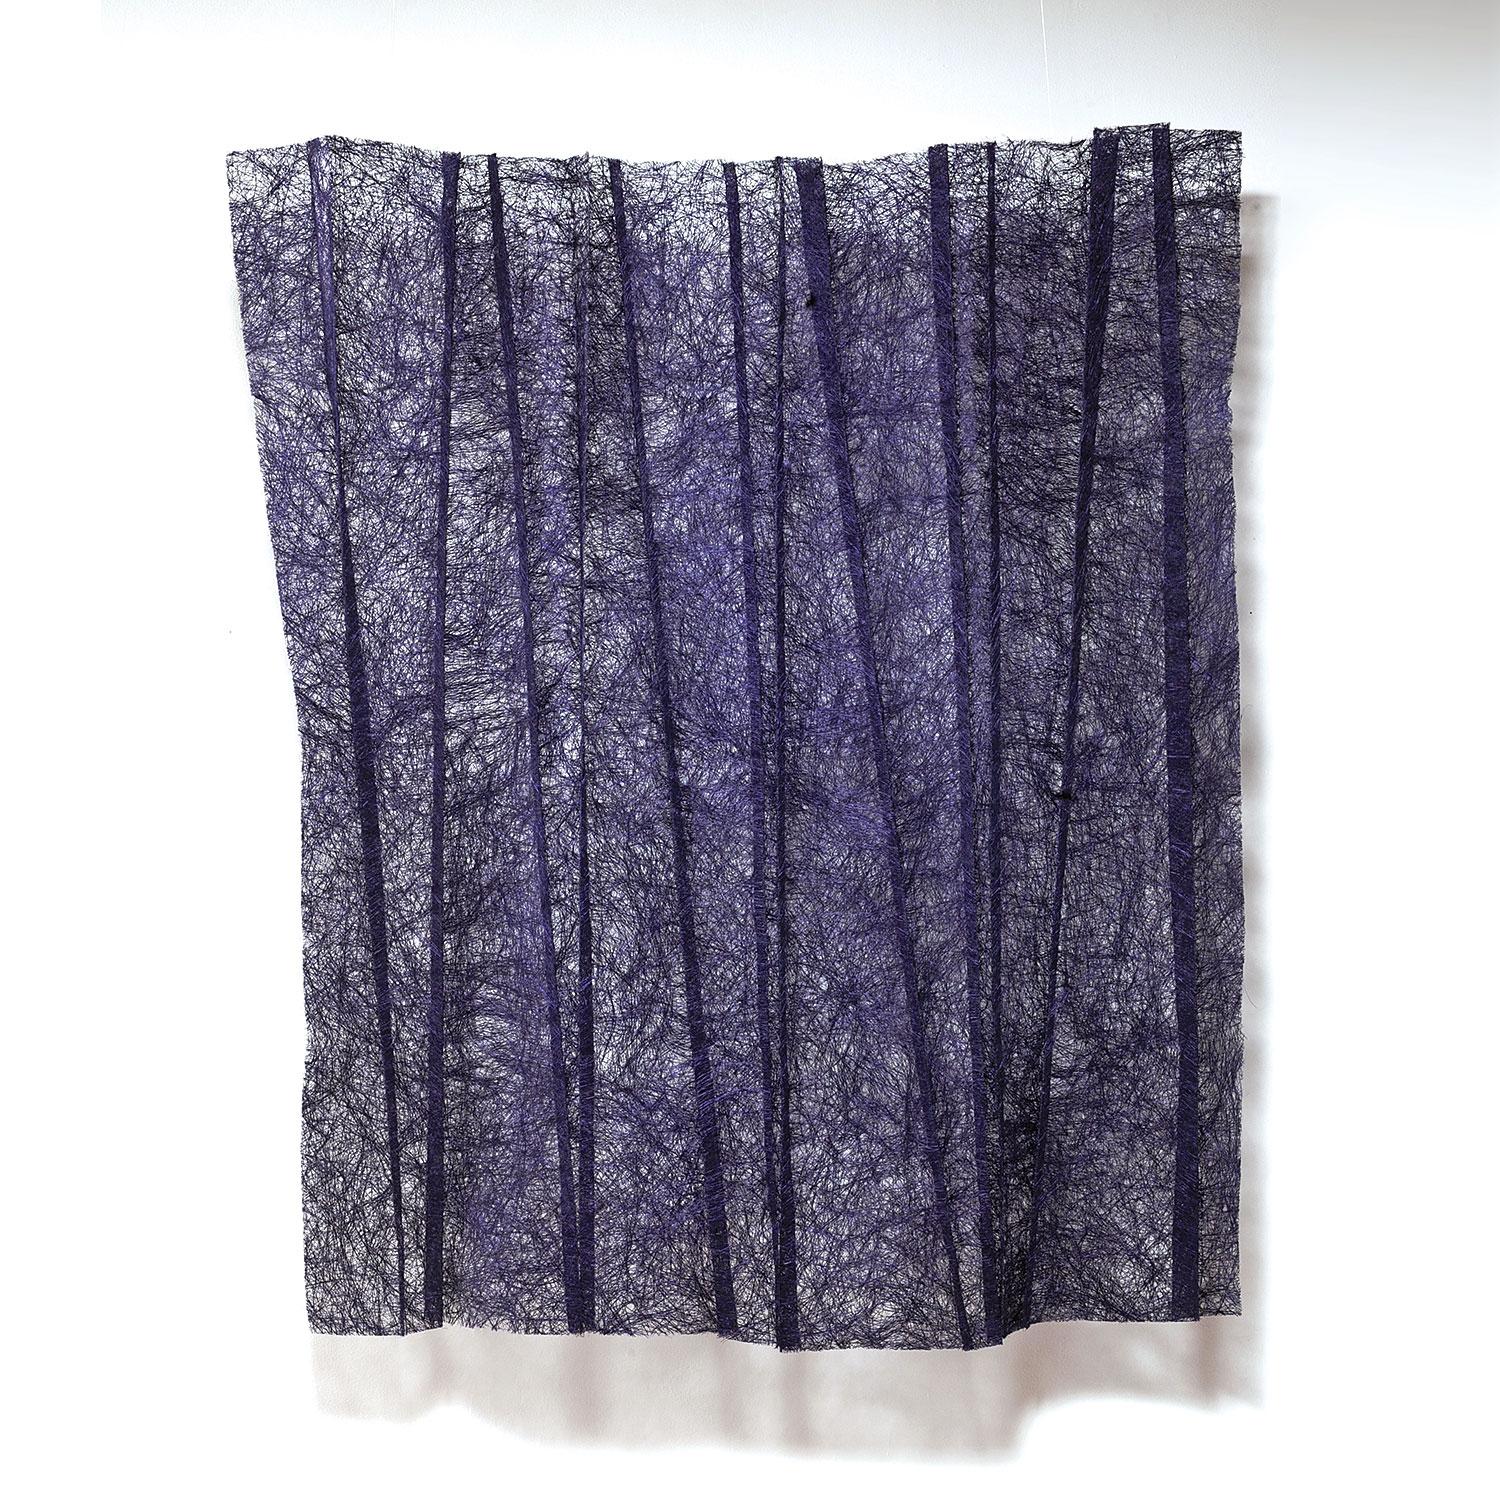 Blue/Purple Pleats is made of sisal fibers, dyed and formed in a technique unique to Mia Olsson. The sisal fibers used by the Swedish artist are shiny and reflect the light, even more when formed in relief. The colors are richly saturated — engaging